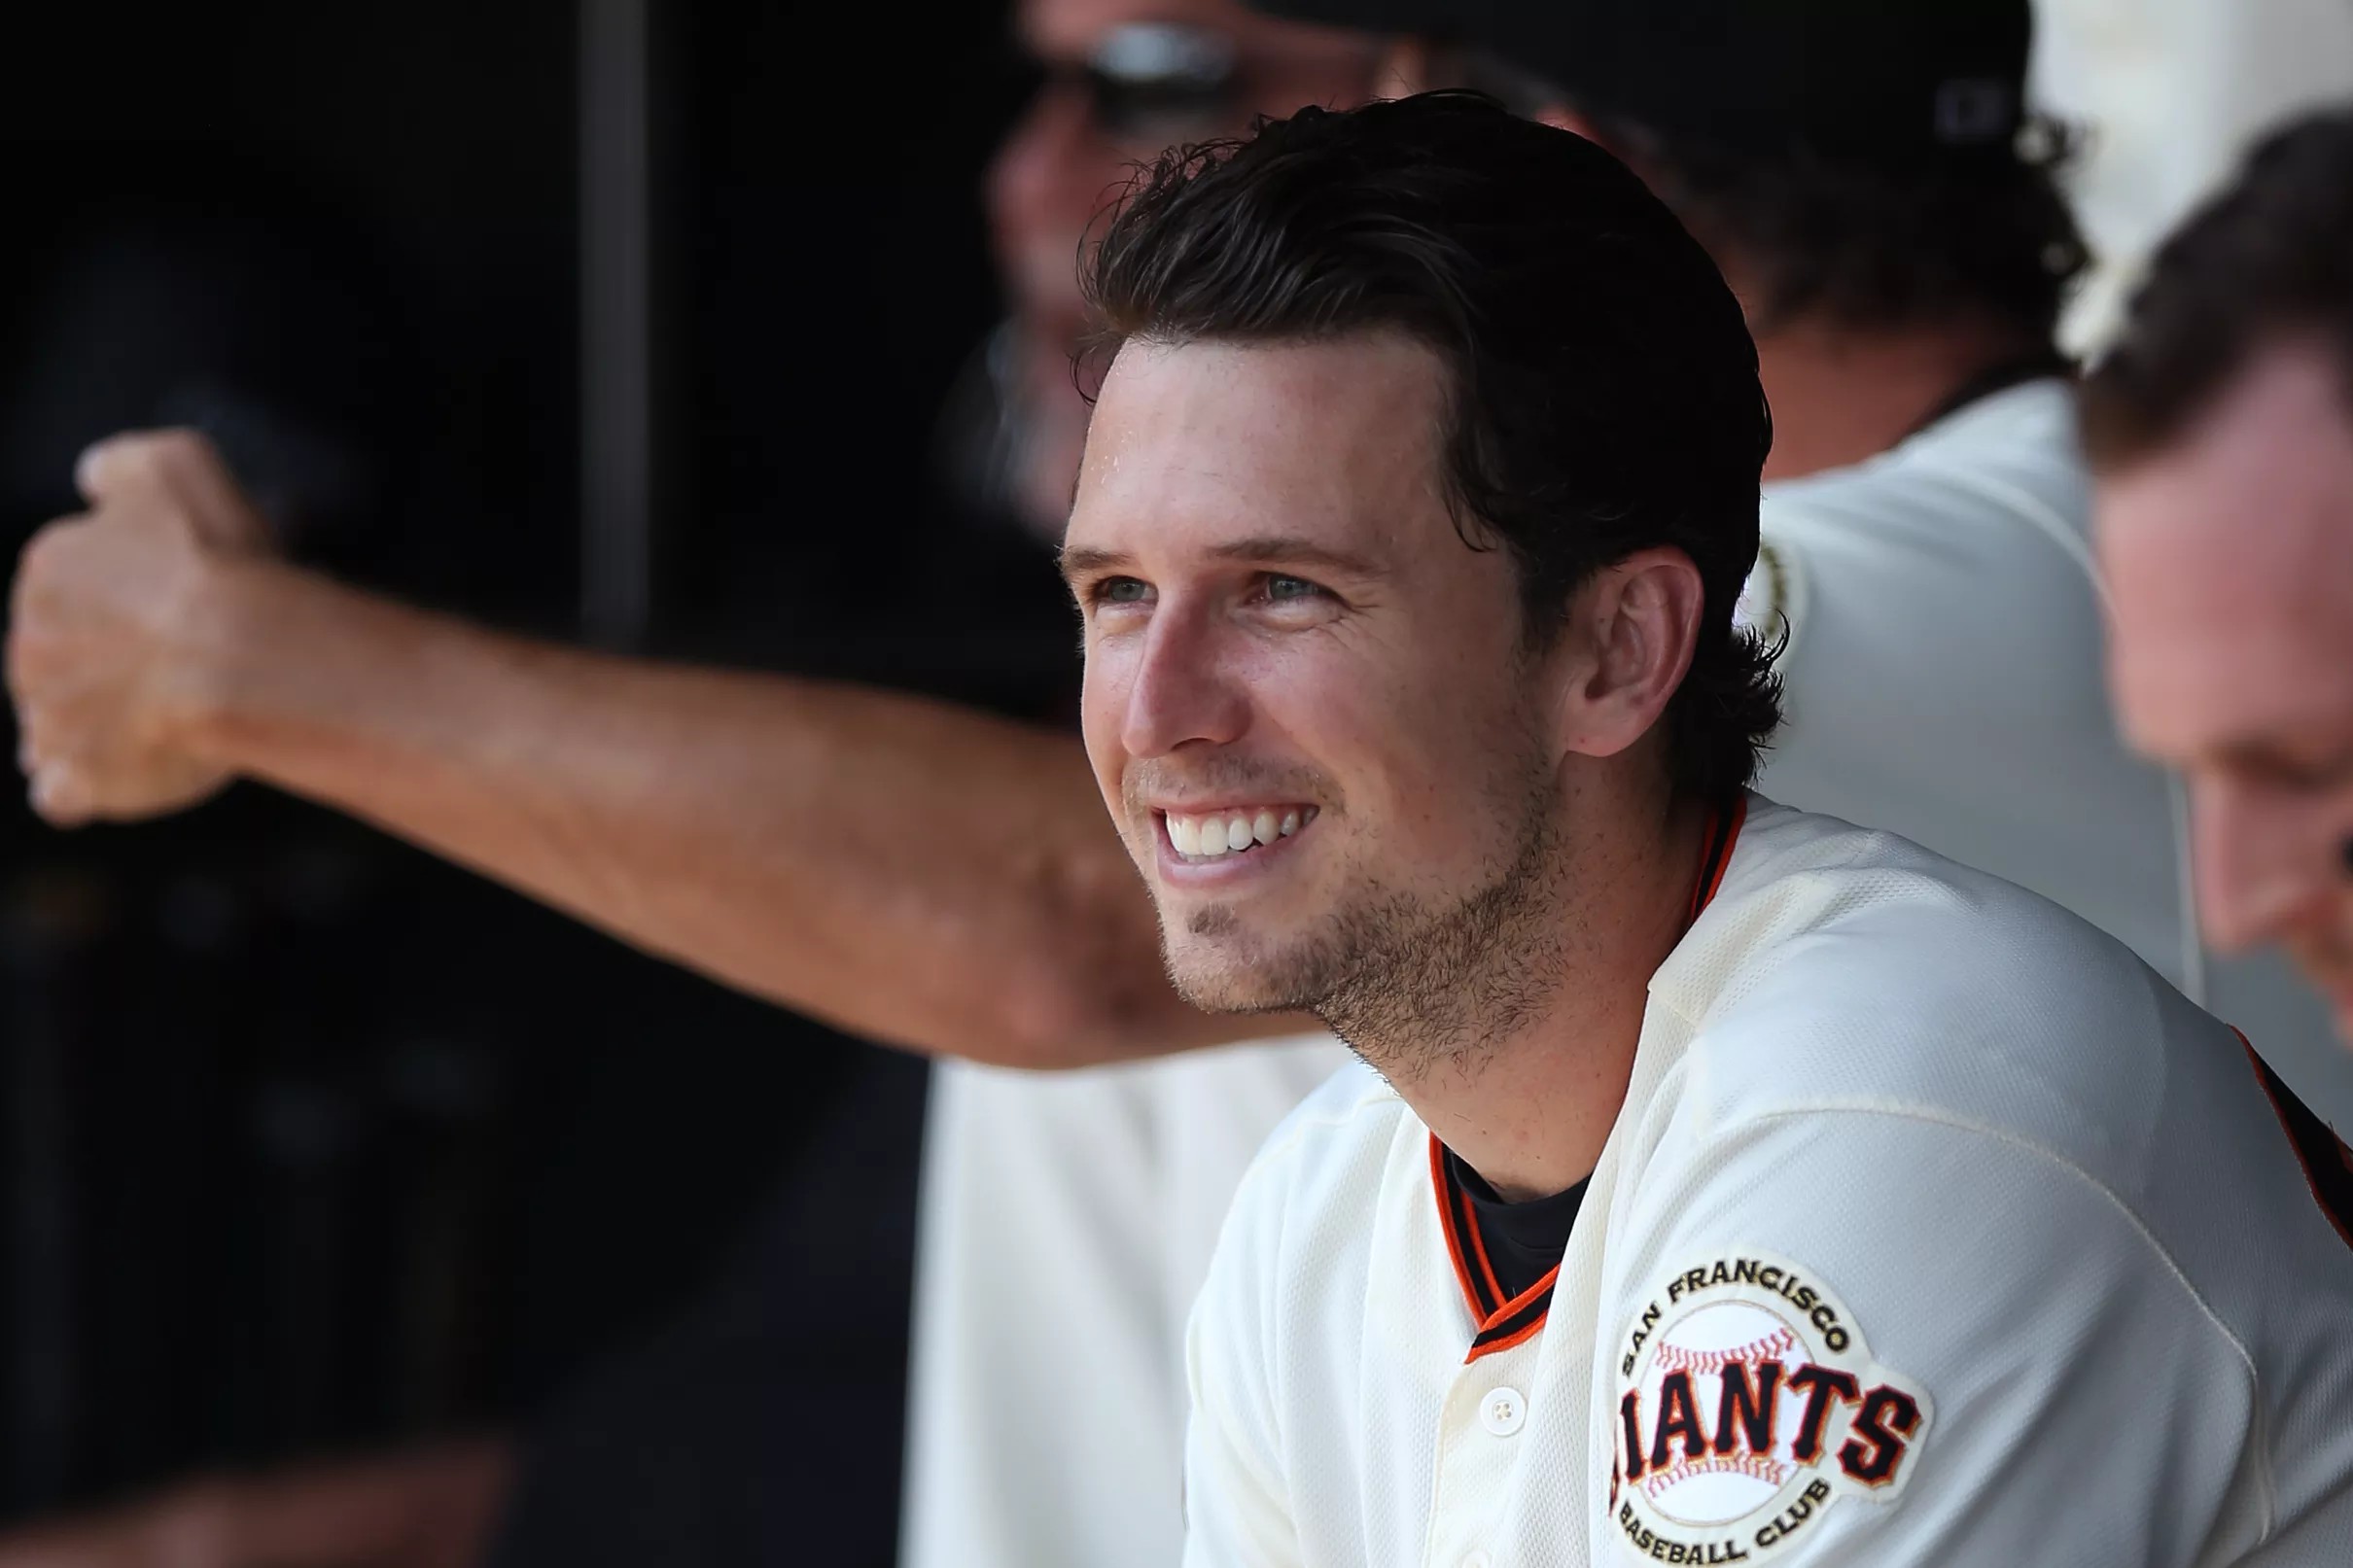 Buster Posey opts out due to adoption of newborn twins